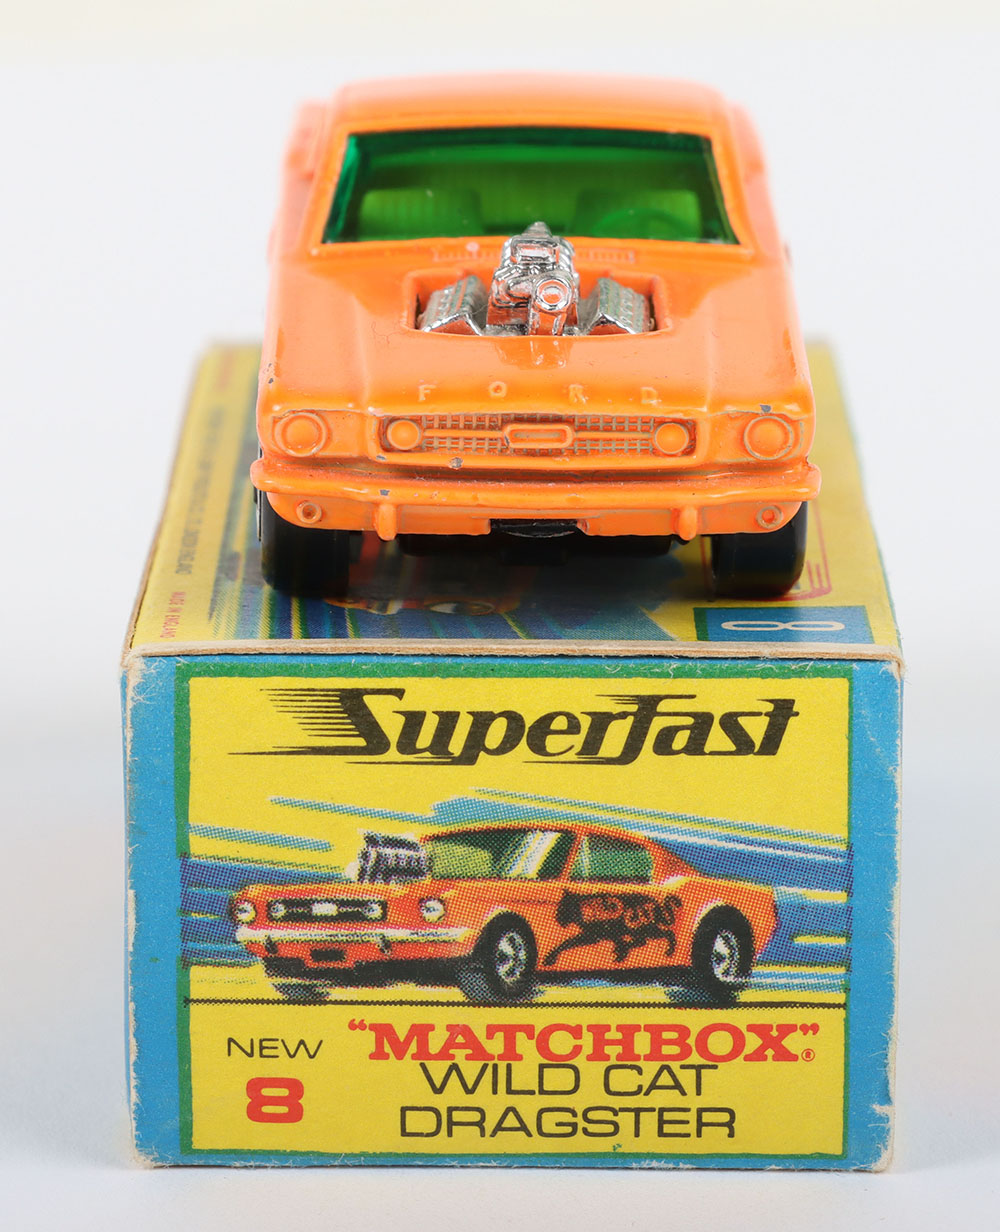 Matchbox Lesney Superfast MB-8 Wild Cat Dragster, Orange body with scarce SAILBOAT labels - Image 3 of 5